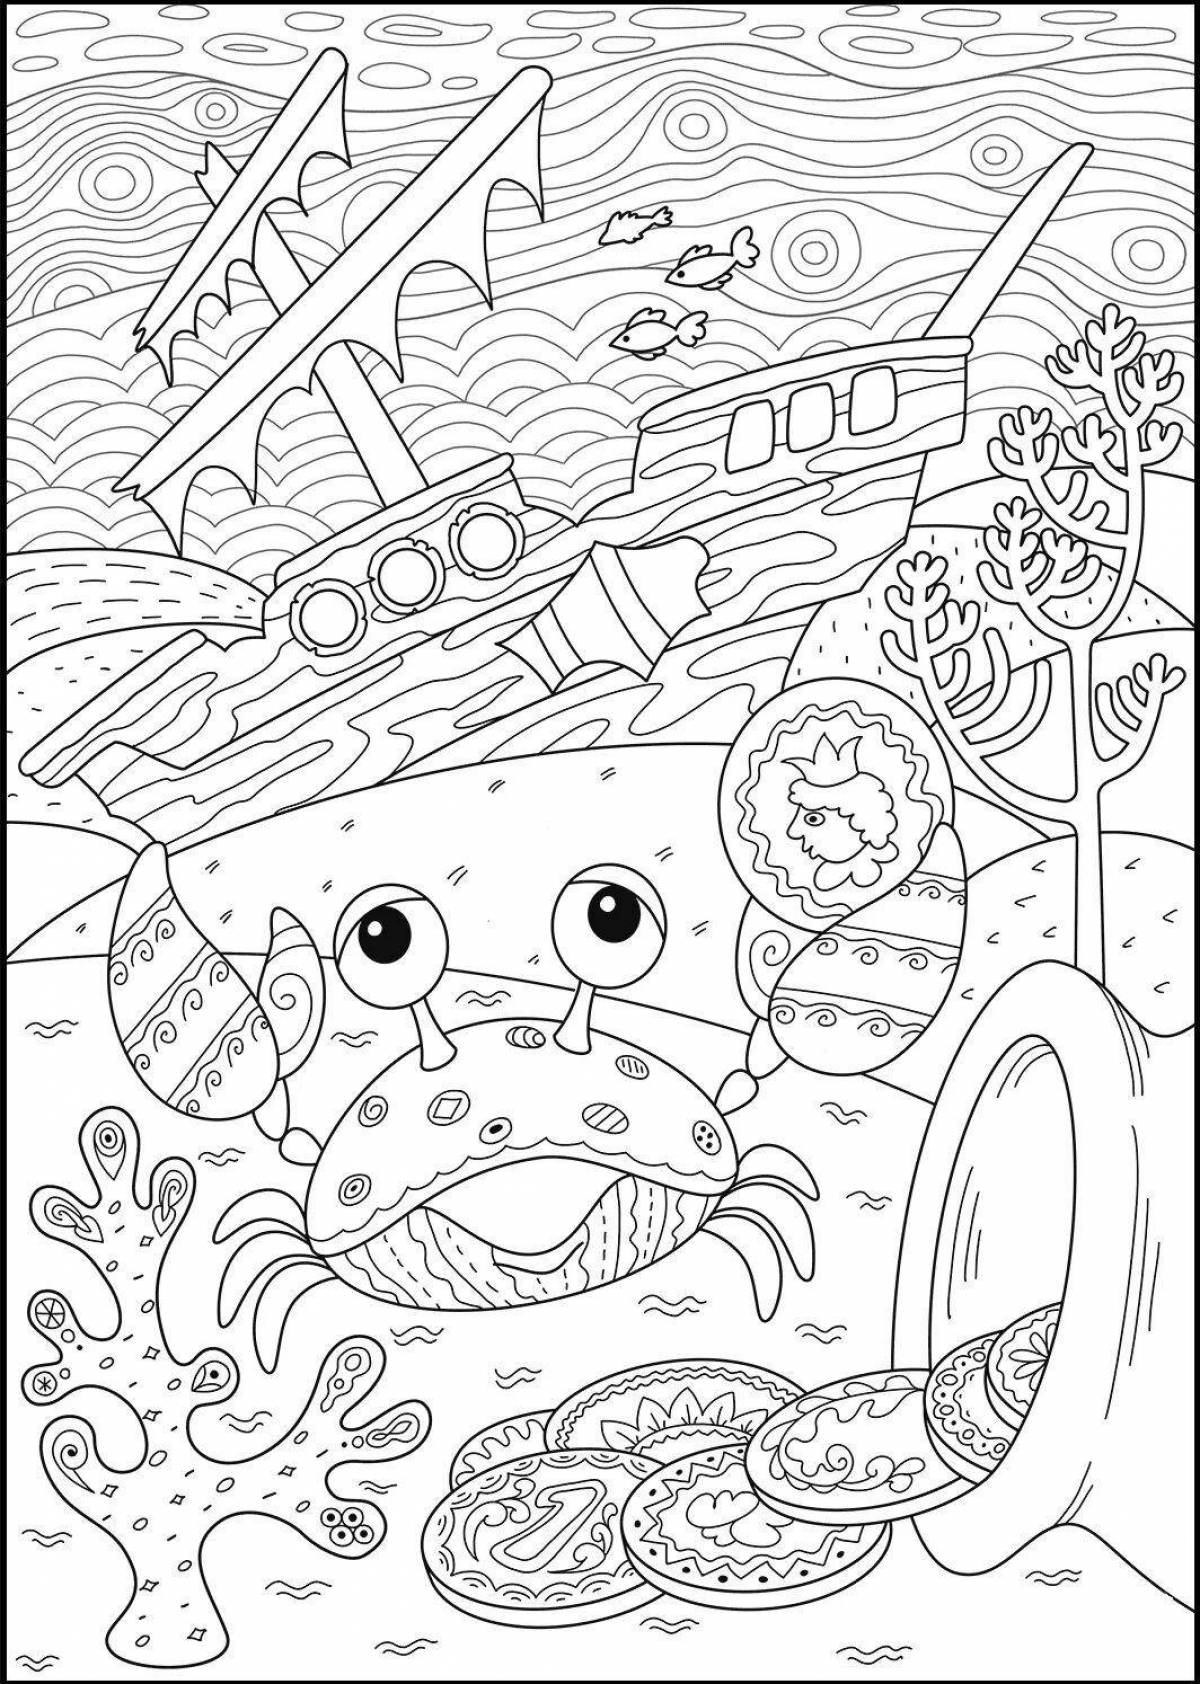 Amazing shipwreck coloring page